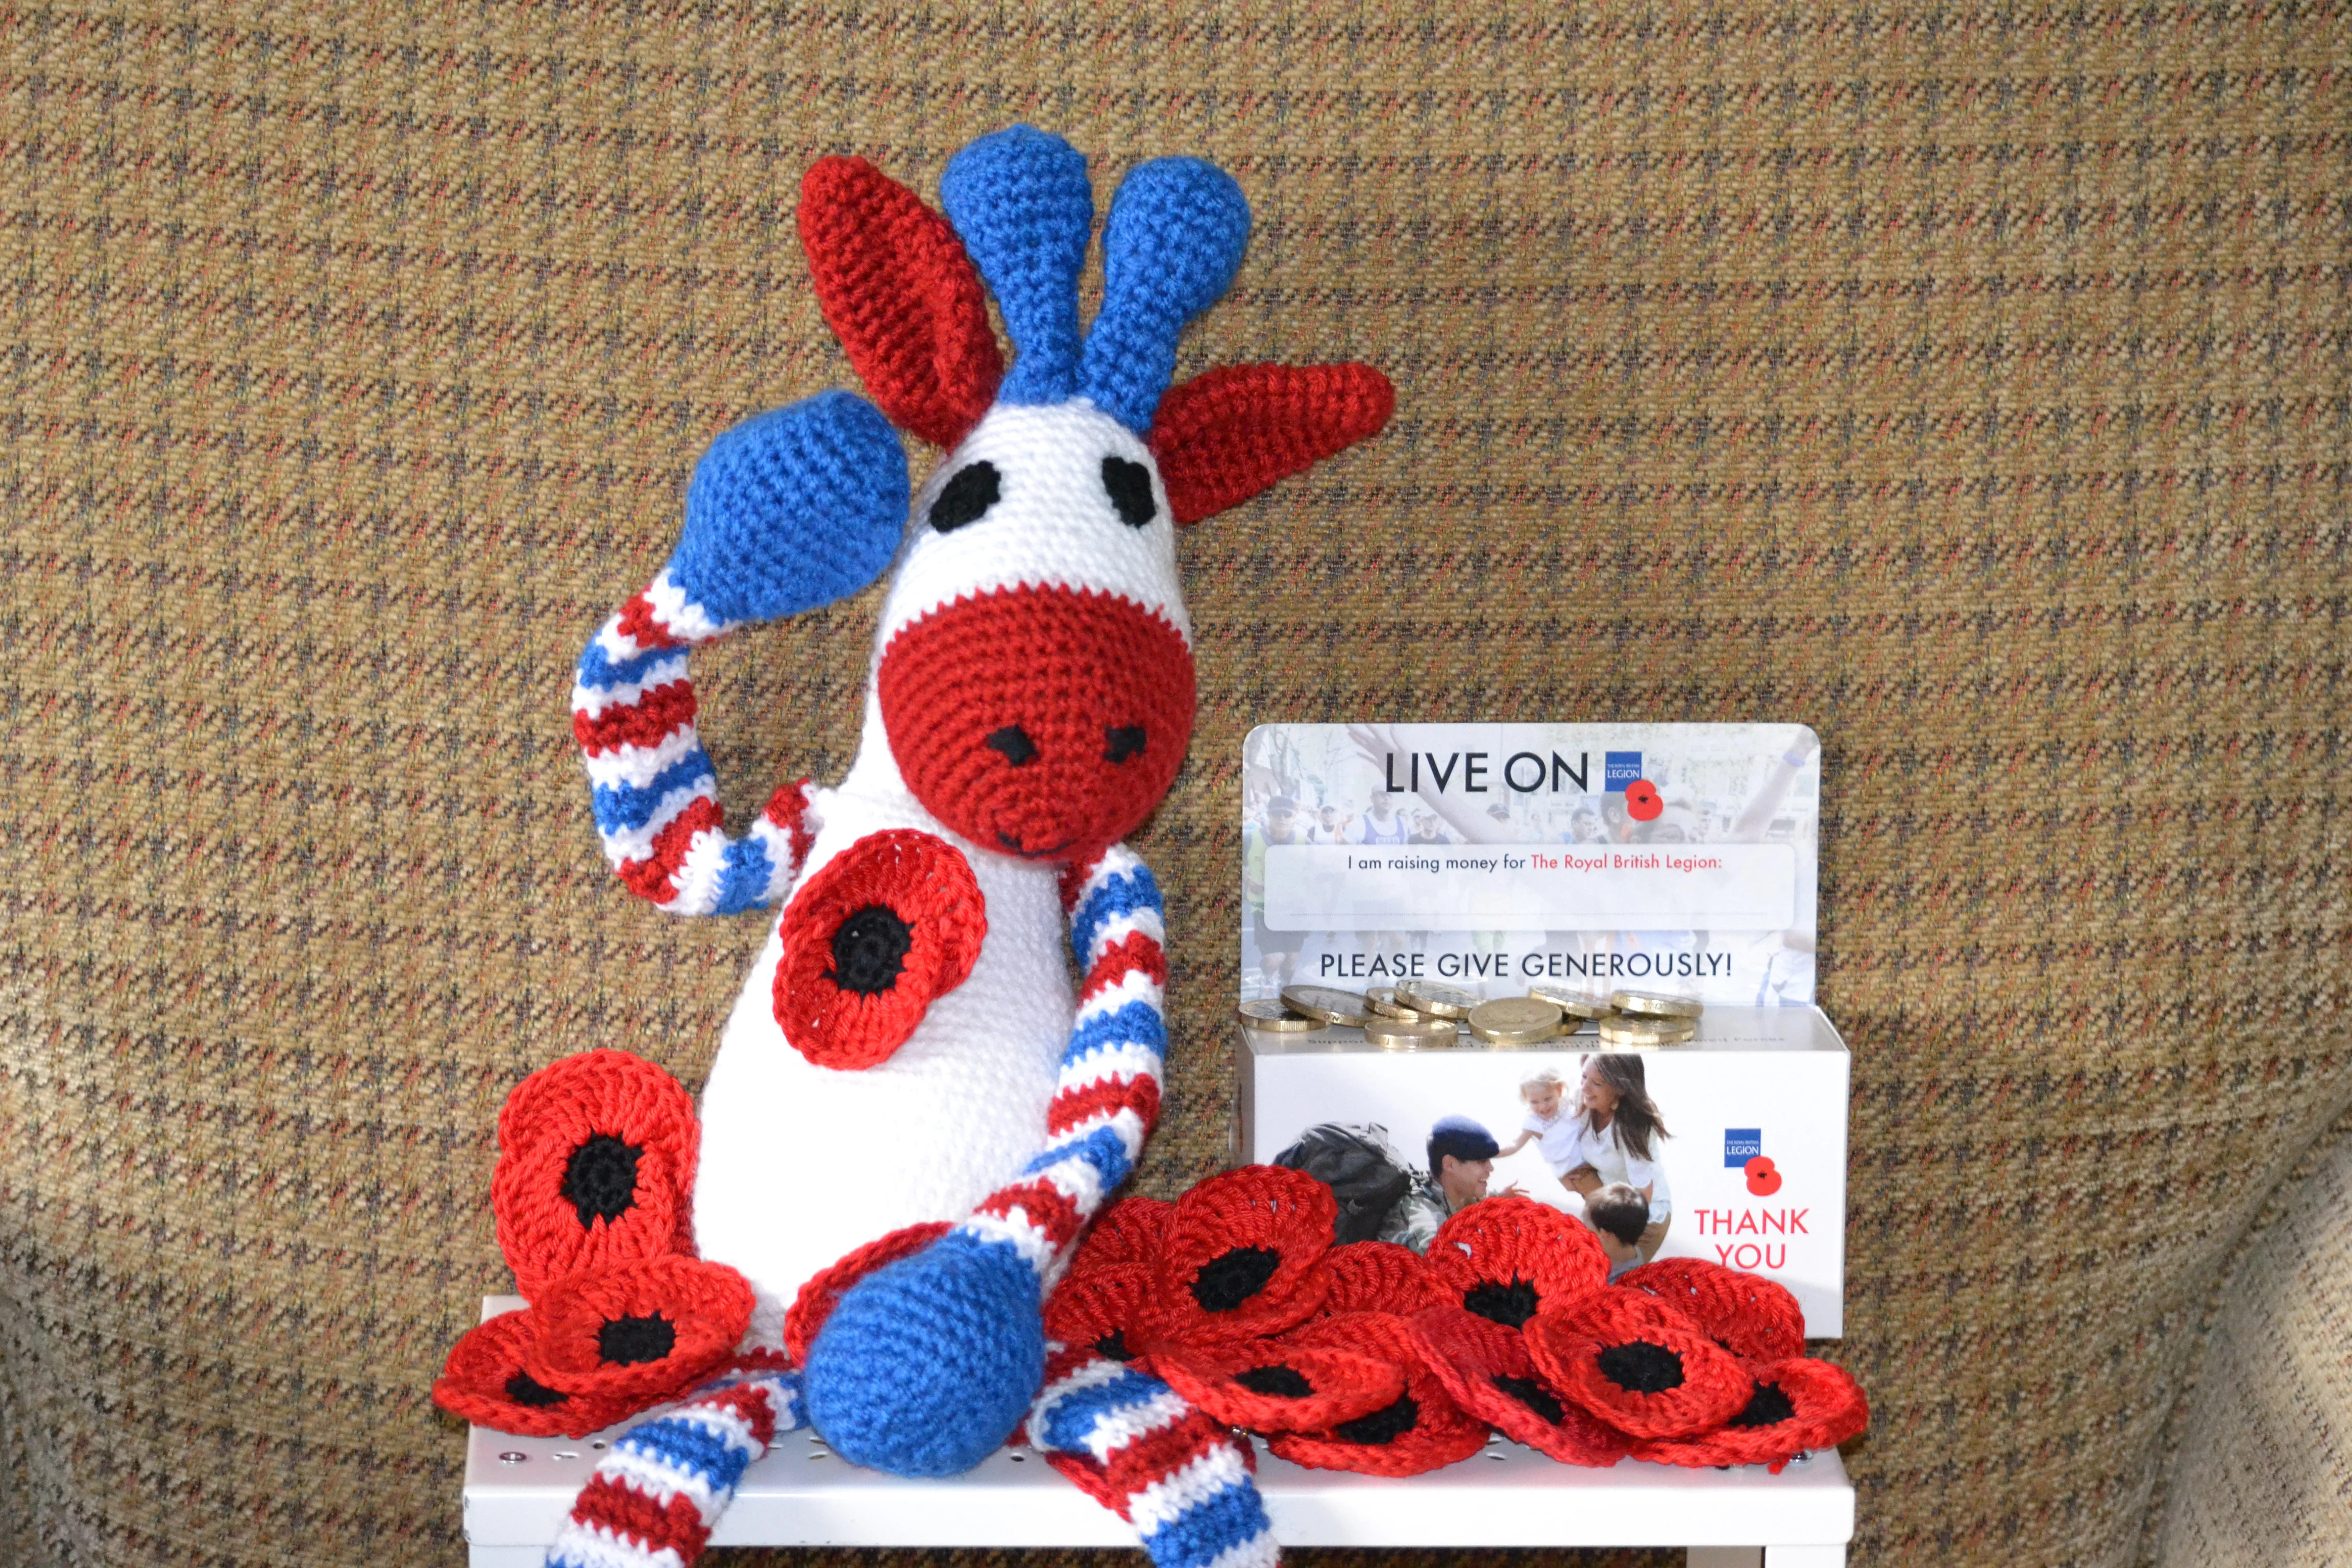 All proceeds to Royal British Legion hand knitted ref 001 Poppy 